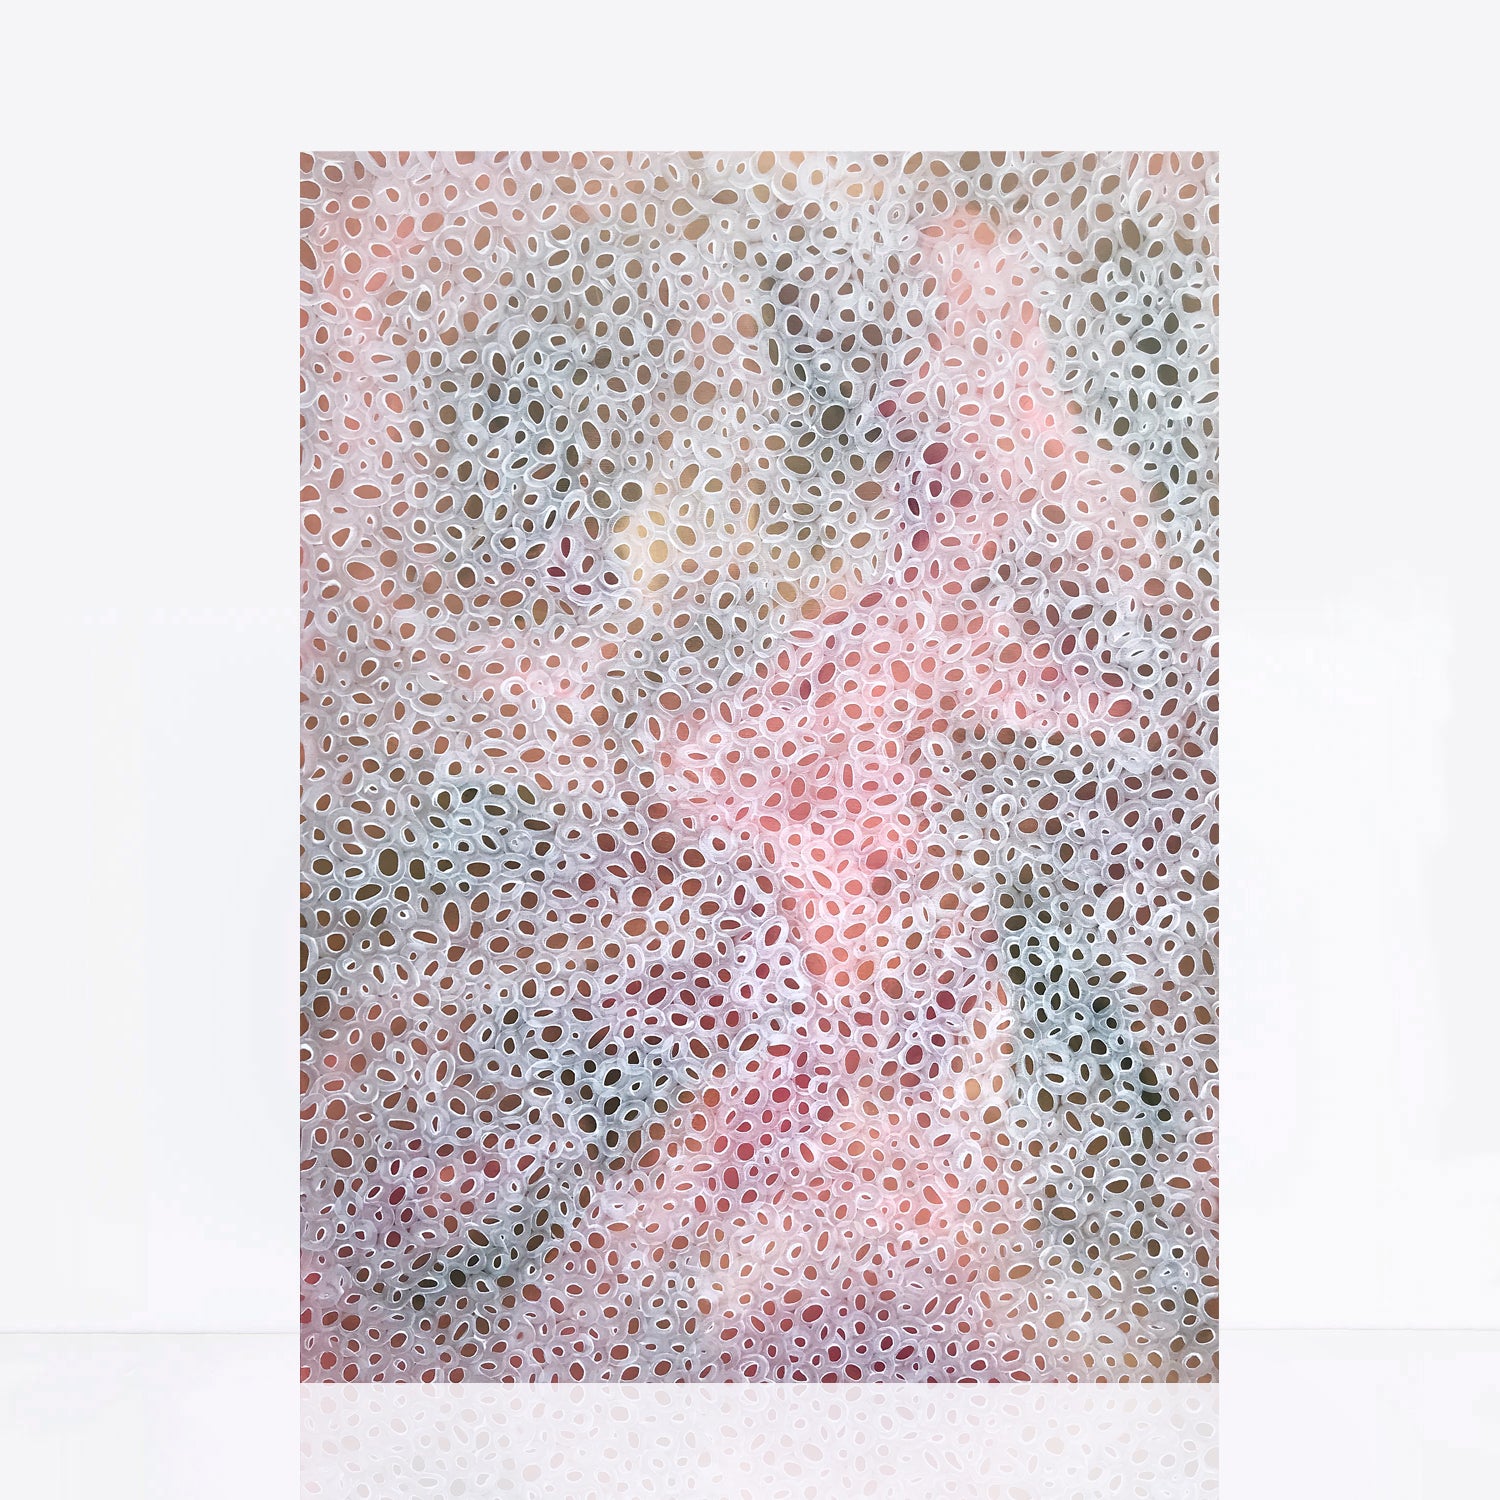 large pink abstract Australian painting with organic shapes inspired by the infinity symbol